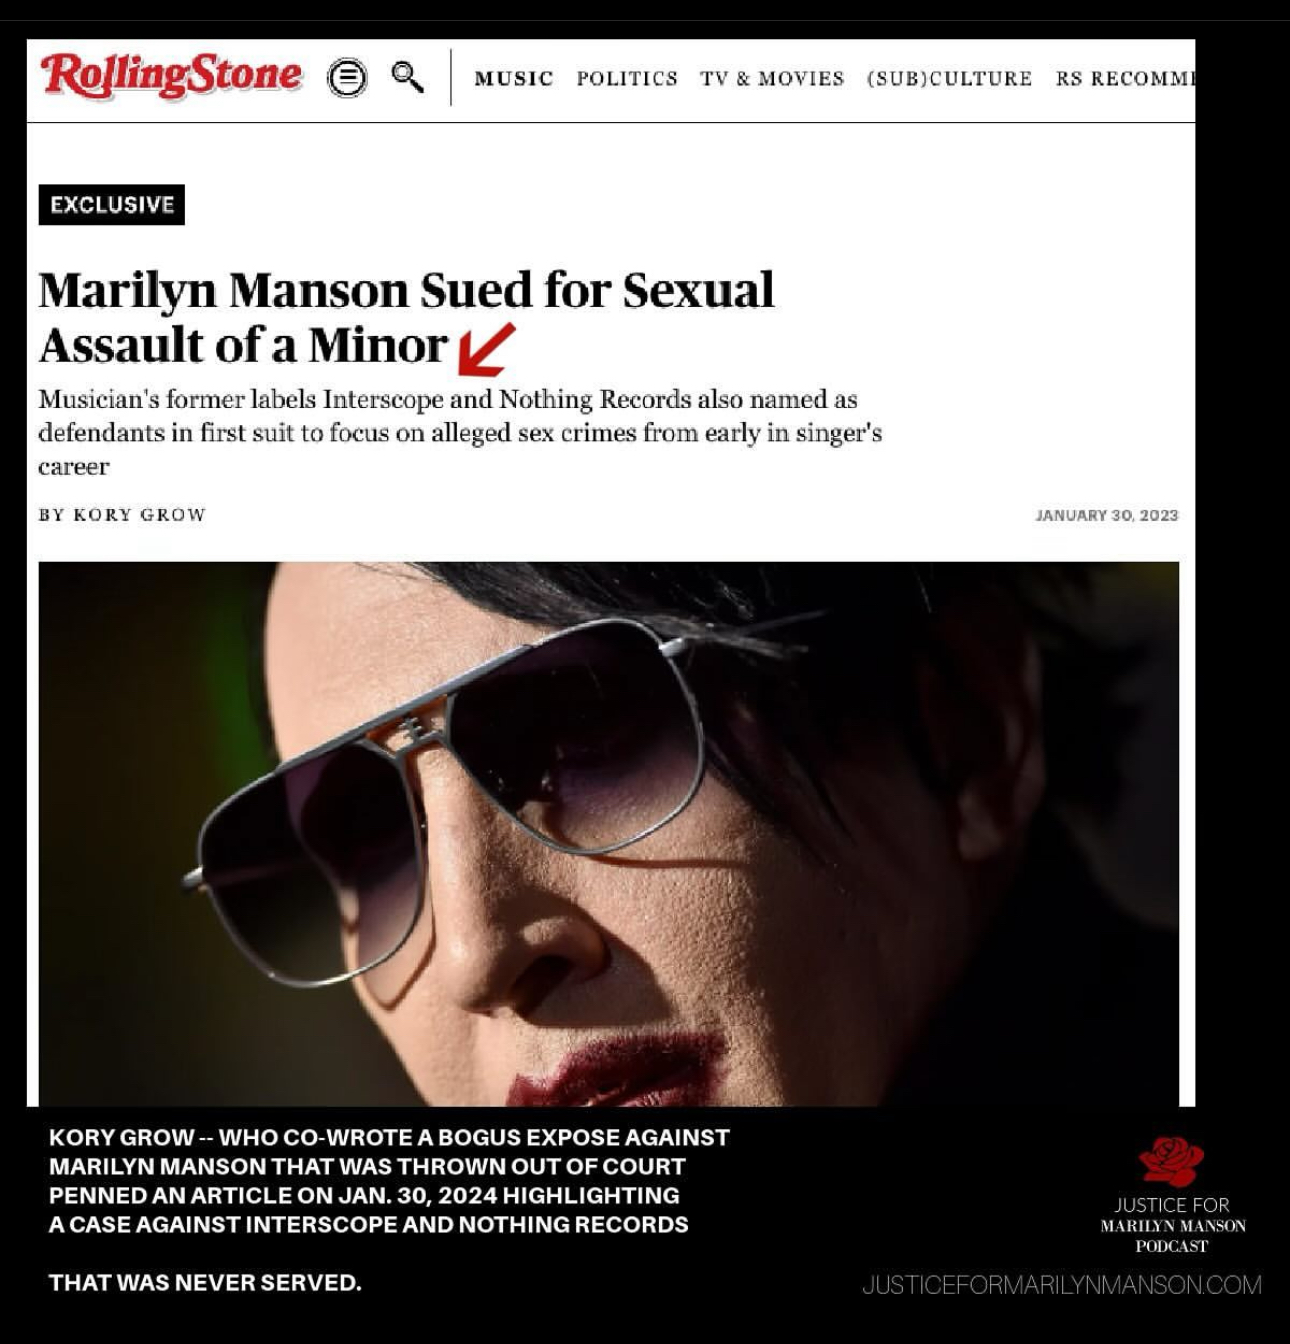 Rolling Stone Marilyn Manson hypocrisy and Jeff Anderson + Karen Barth Menzies Lawsuit that was never served